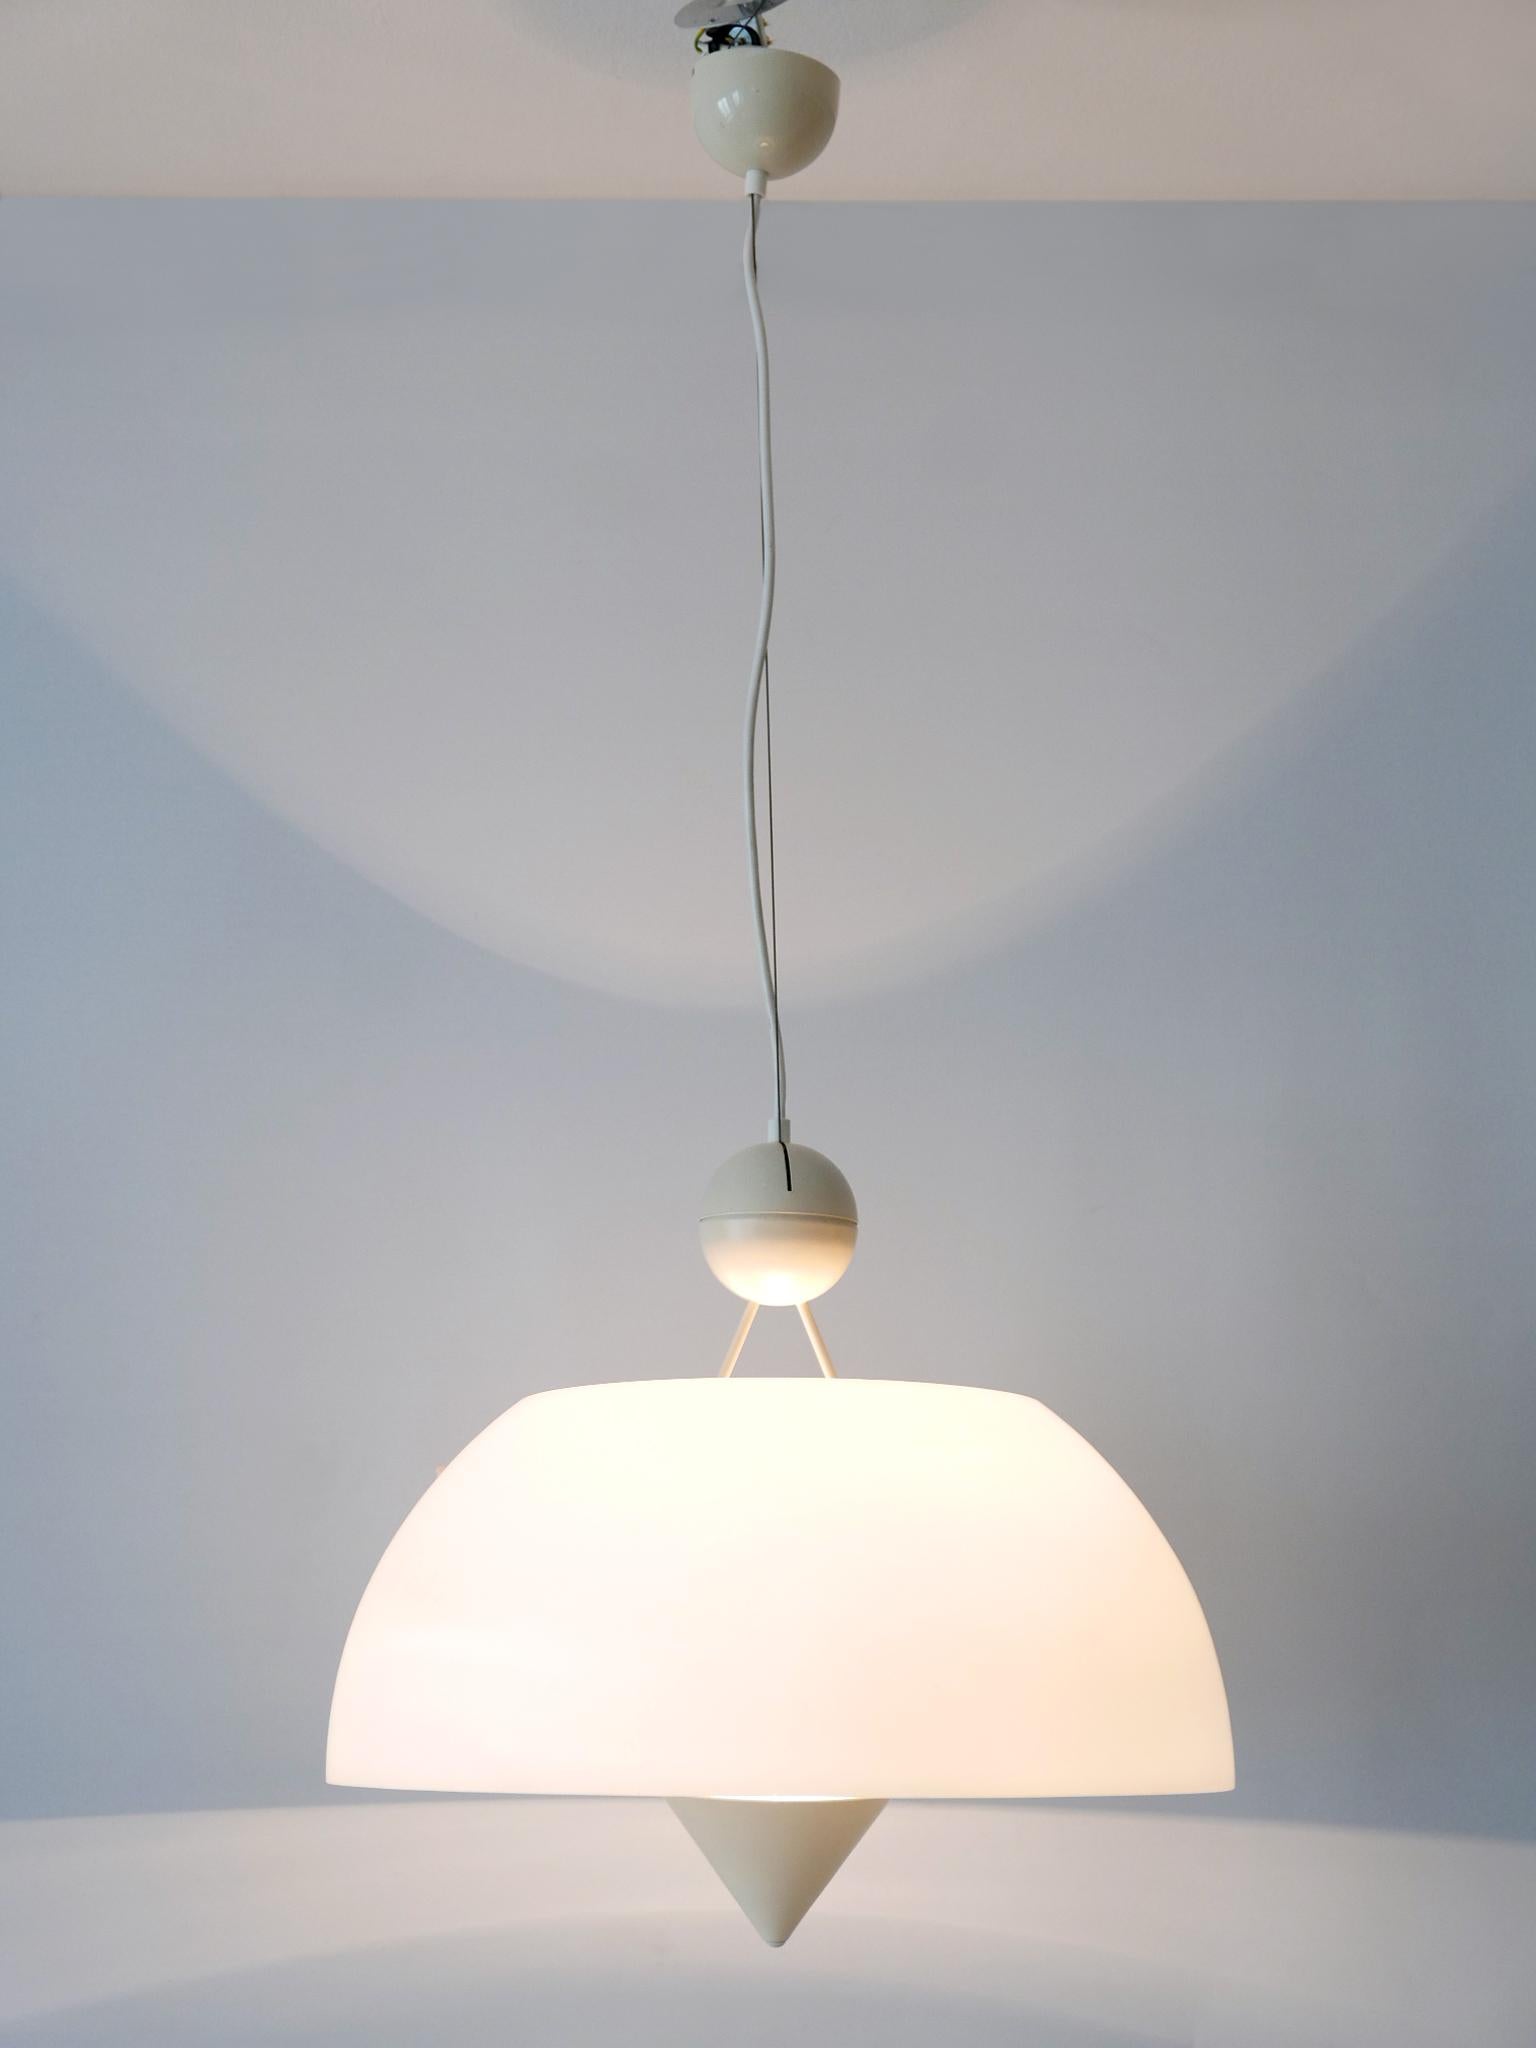 Rare & Elegant Mid-Century Modern Pendant Lamp or Hanging Light Italy 1970s In Good Condition For Sale In Munich, DE